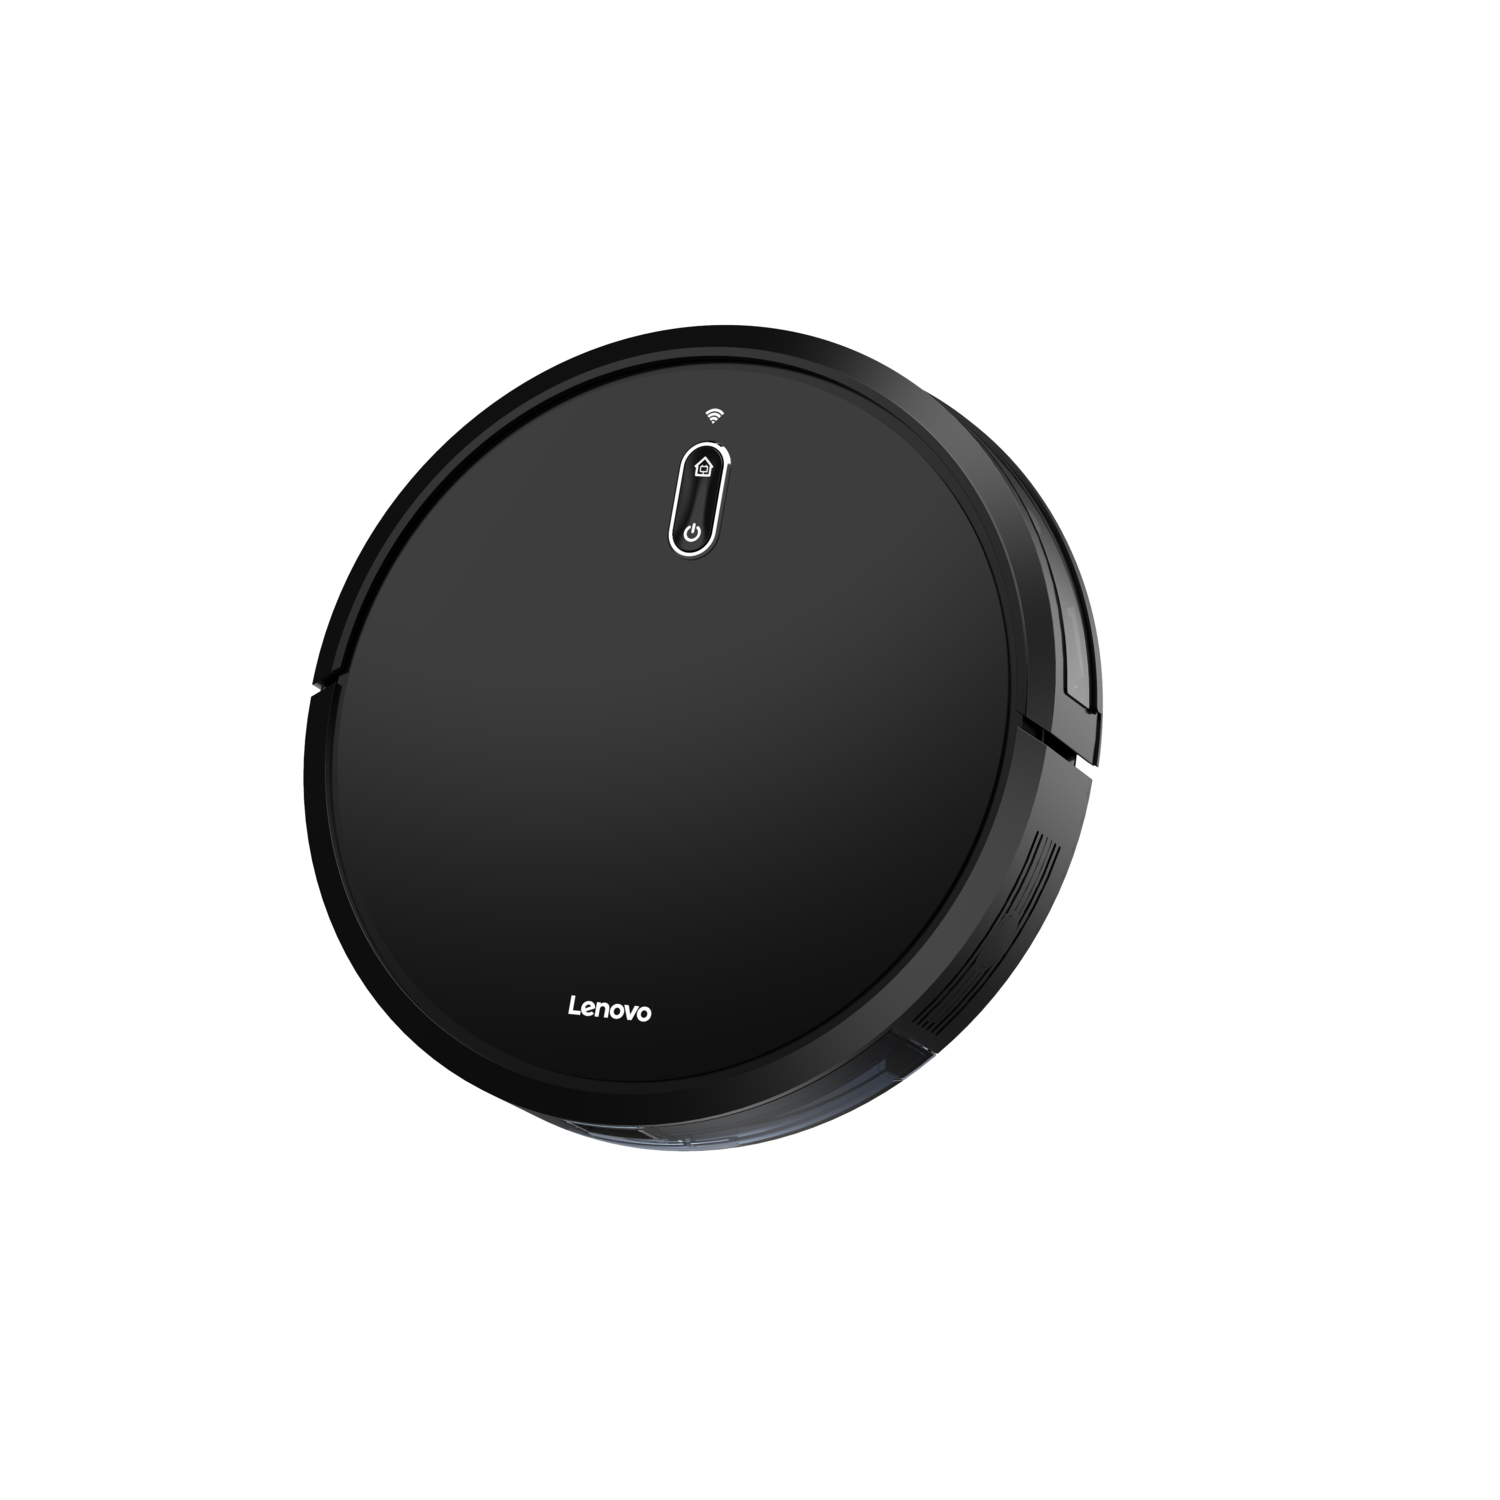 Lenovo E1 1600Pa Robot Vacuum Cleaner Gyroscope Navigation with Intelligent Floor Carpet Sweeping an